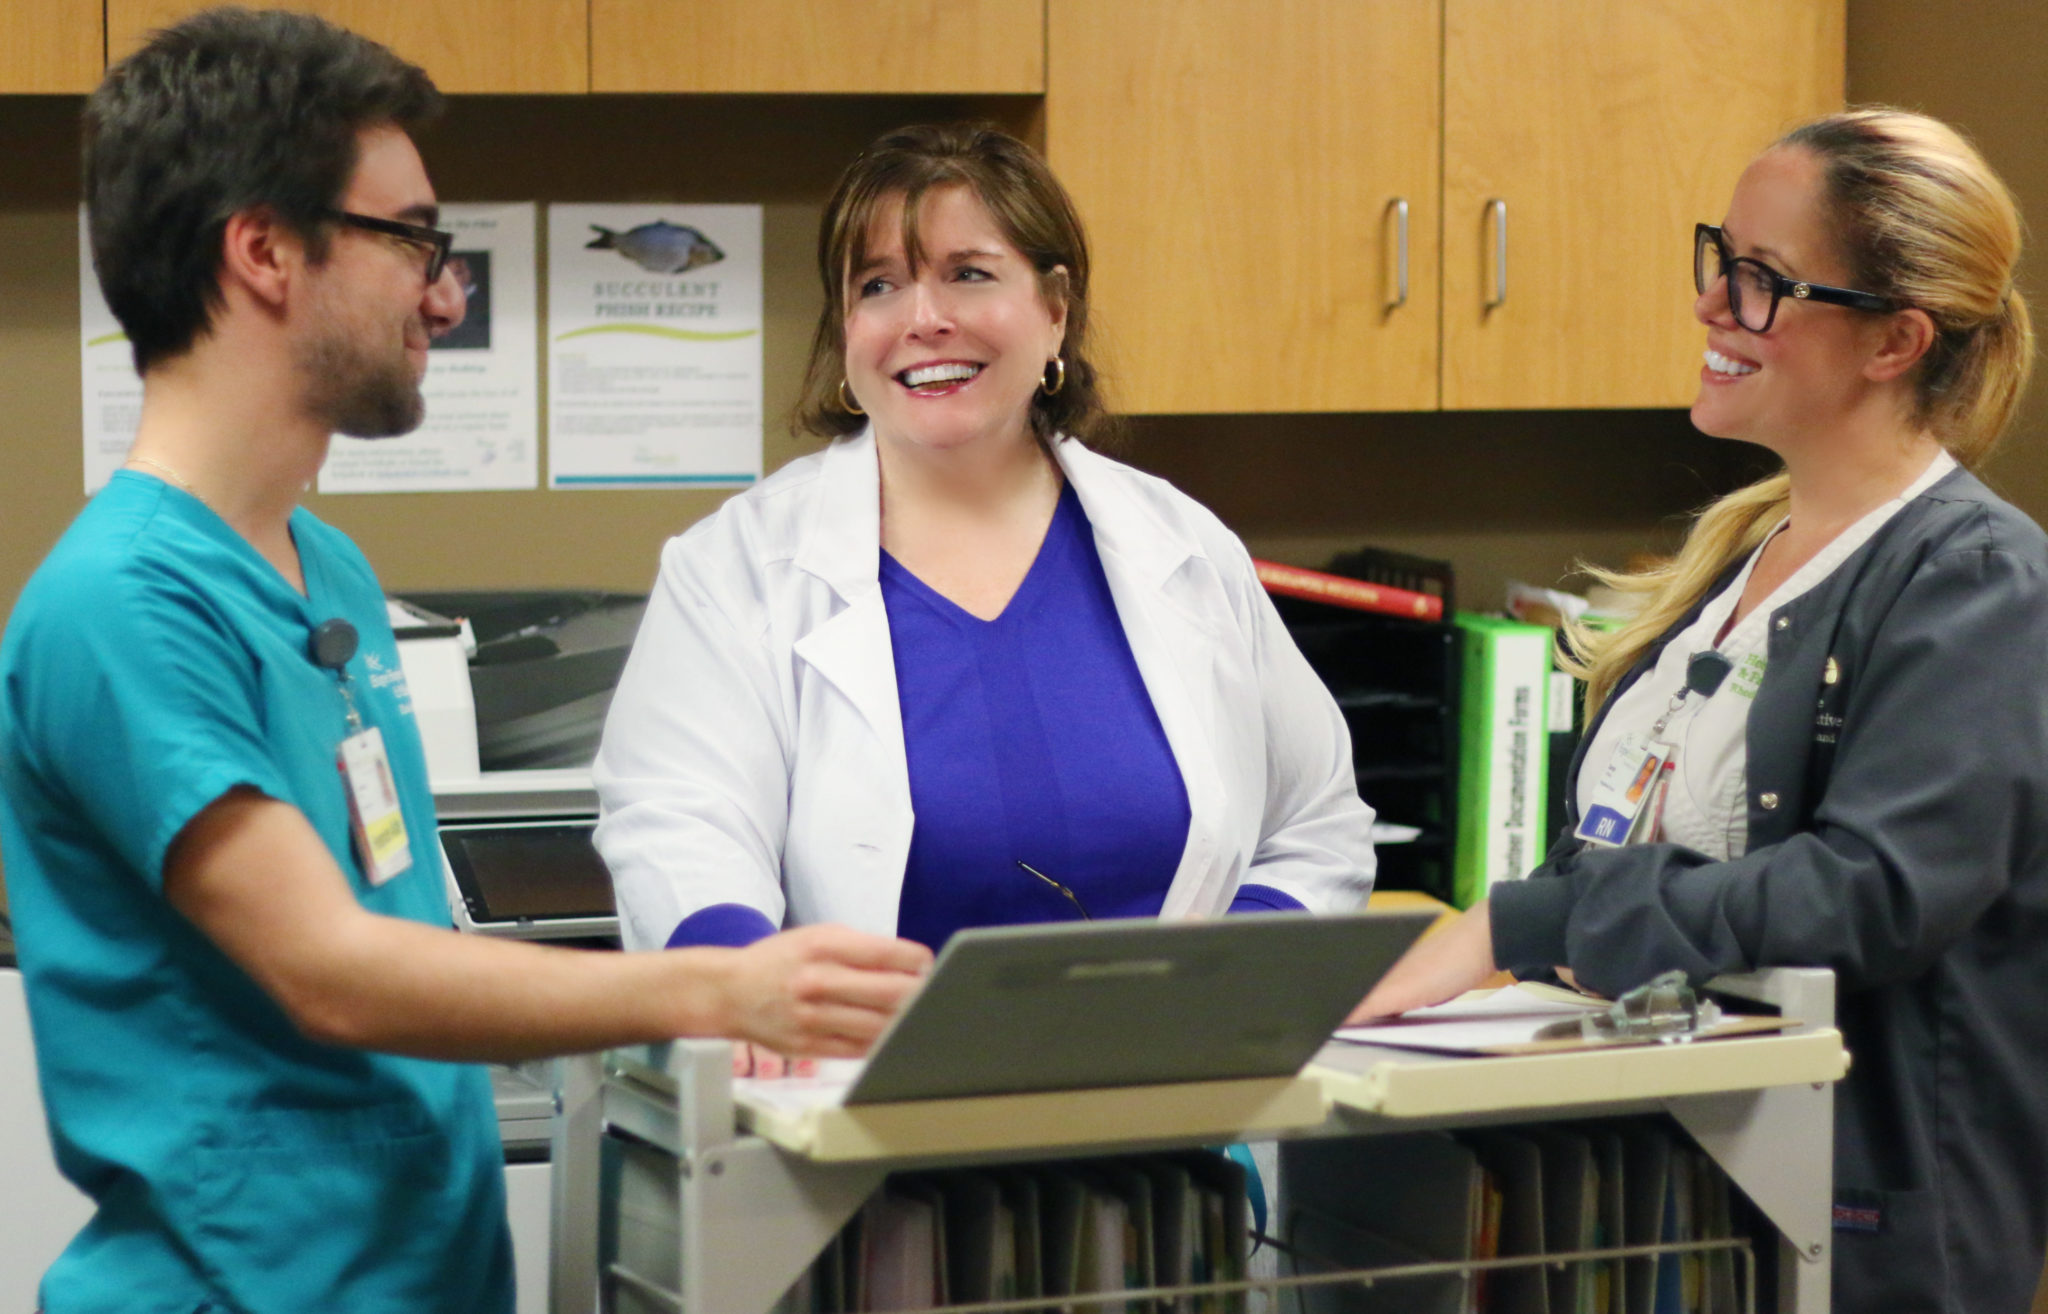 Young male in teal scrubs talking to two female nurses at the nurses station while smiling